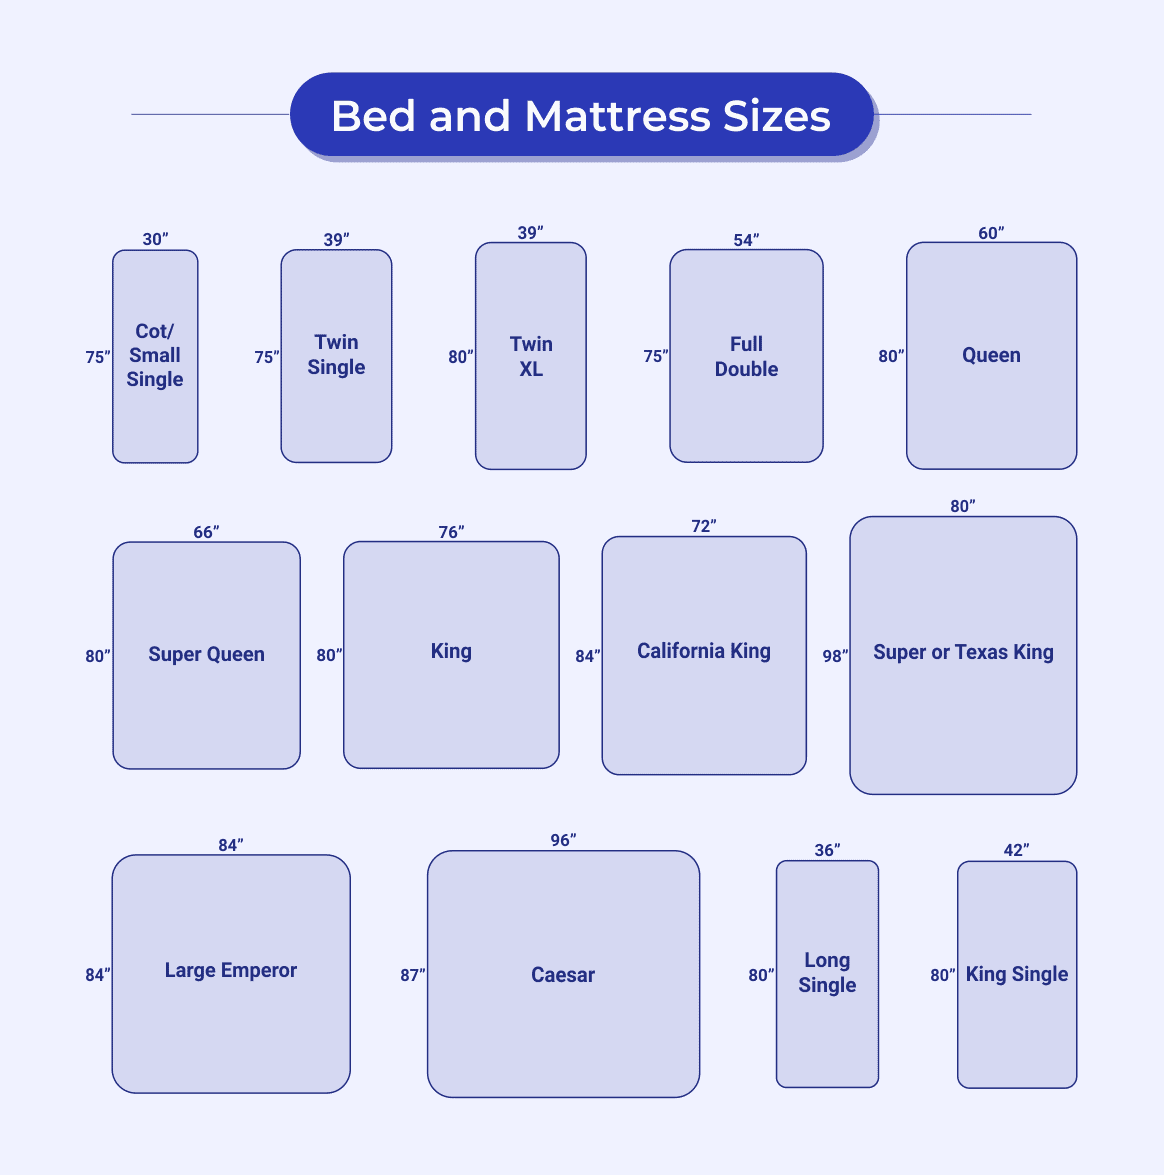 Mattress And Bed Sizes What Are The, What Are The Dimensions Of A King Size Bed In Feet